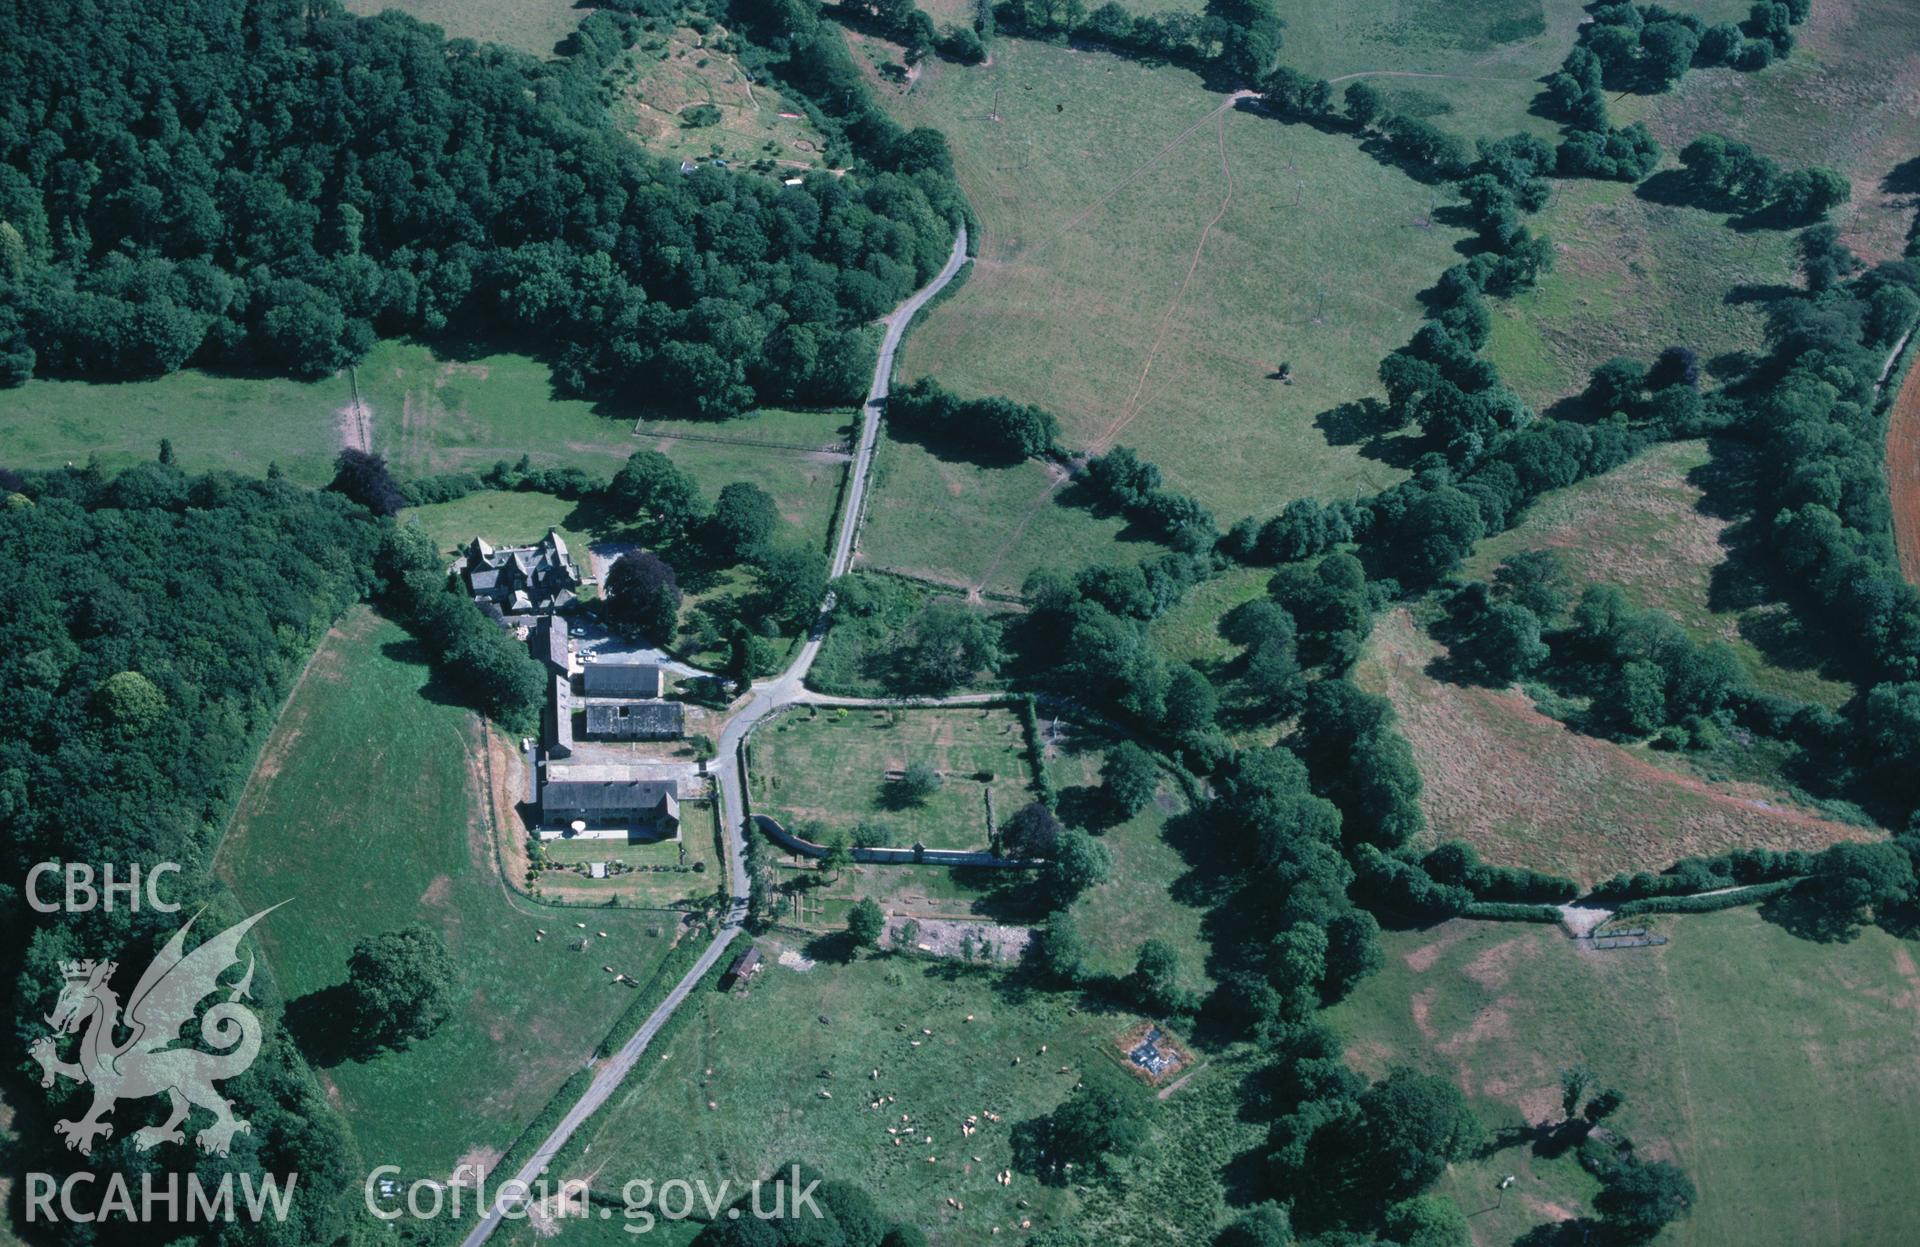 Slide of RCAHMW colour oblique aerial photograph of Whitland Abbey, taken by C.R. Musson, 25/7/1996.